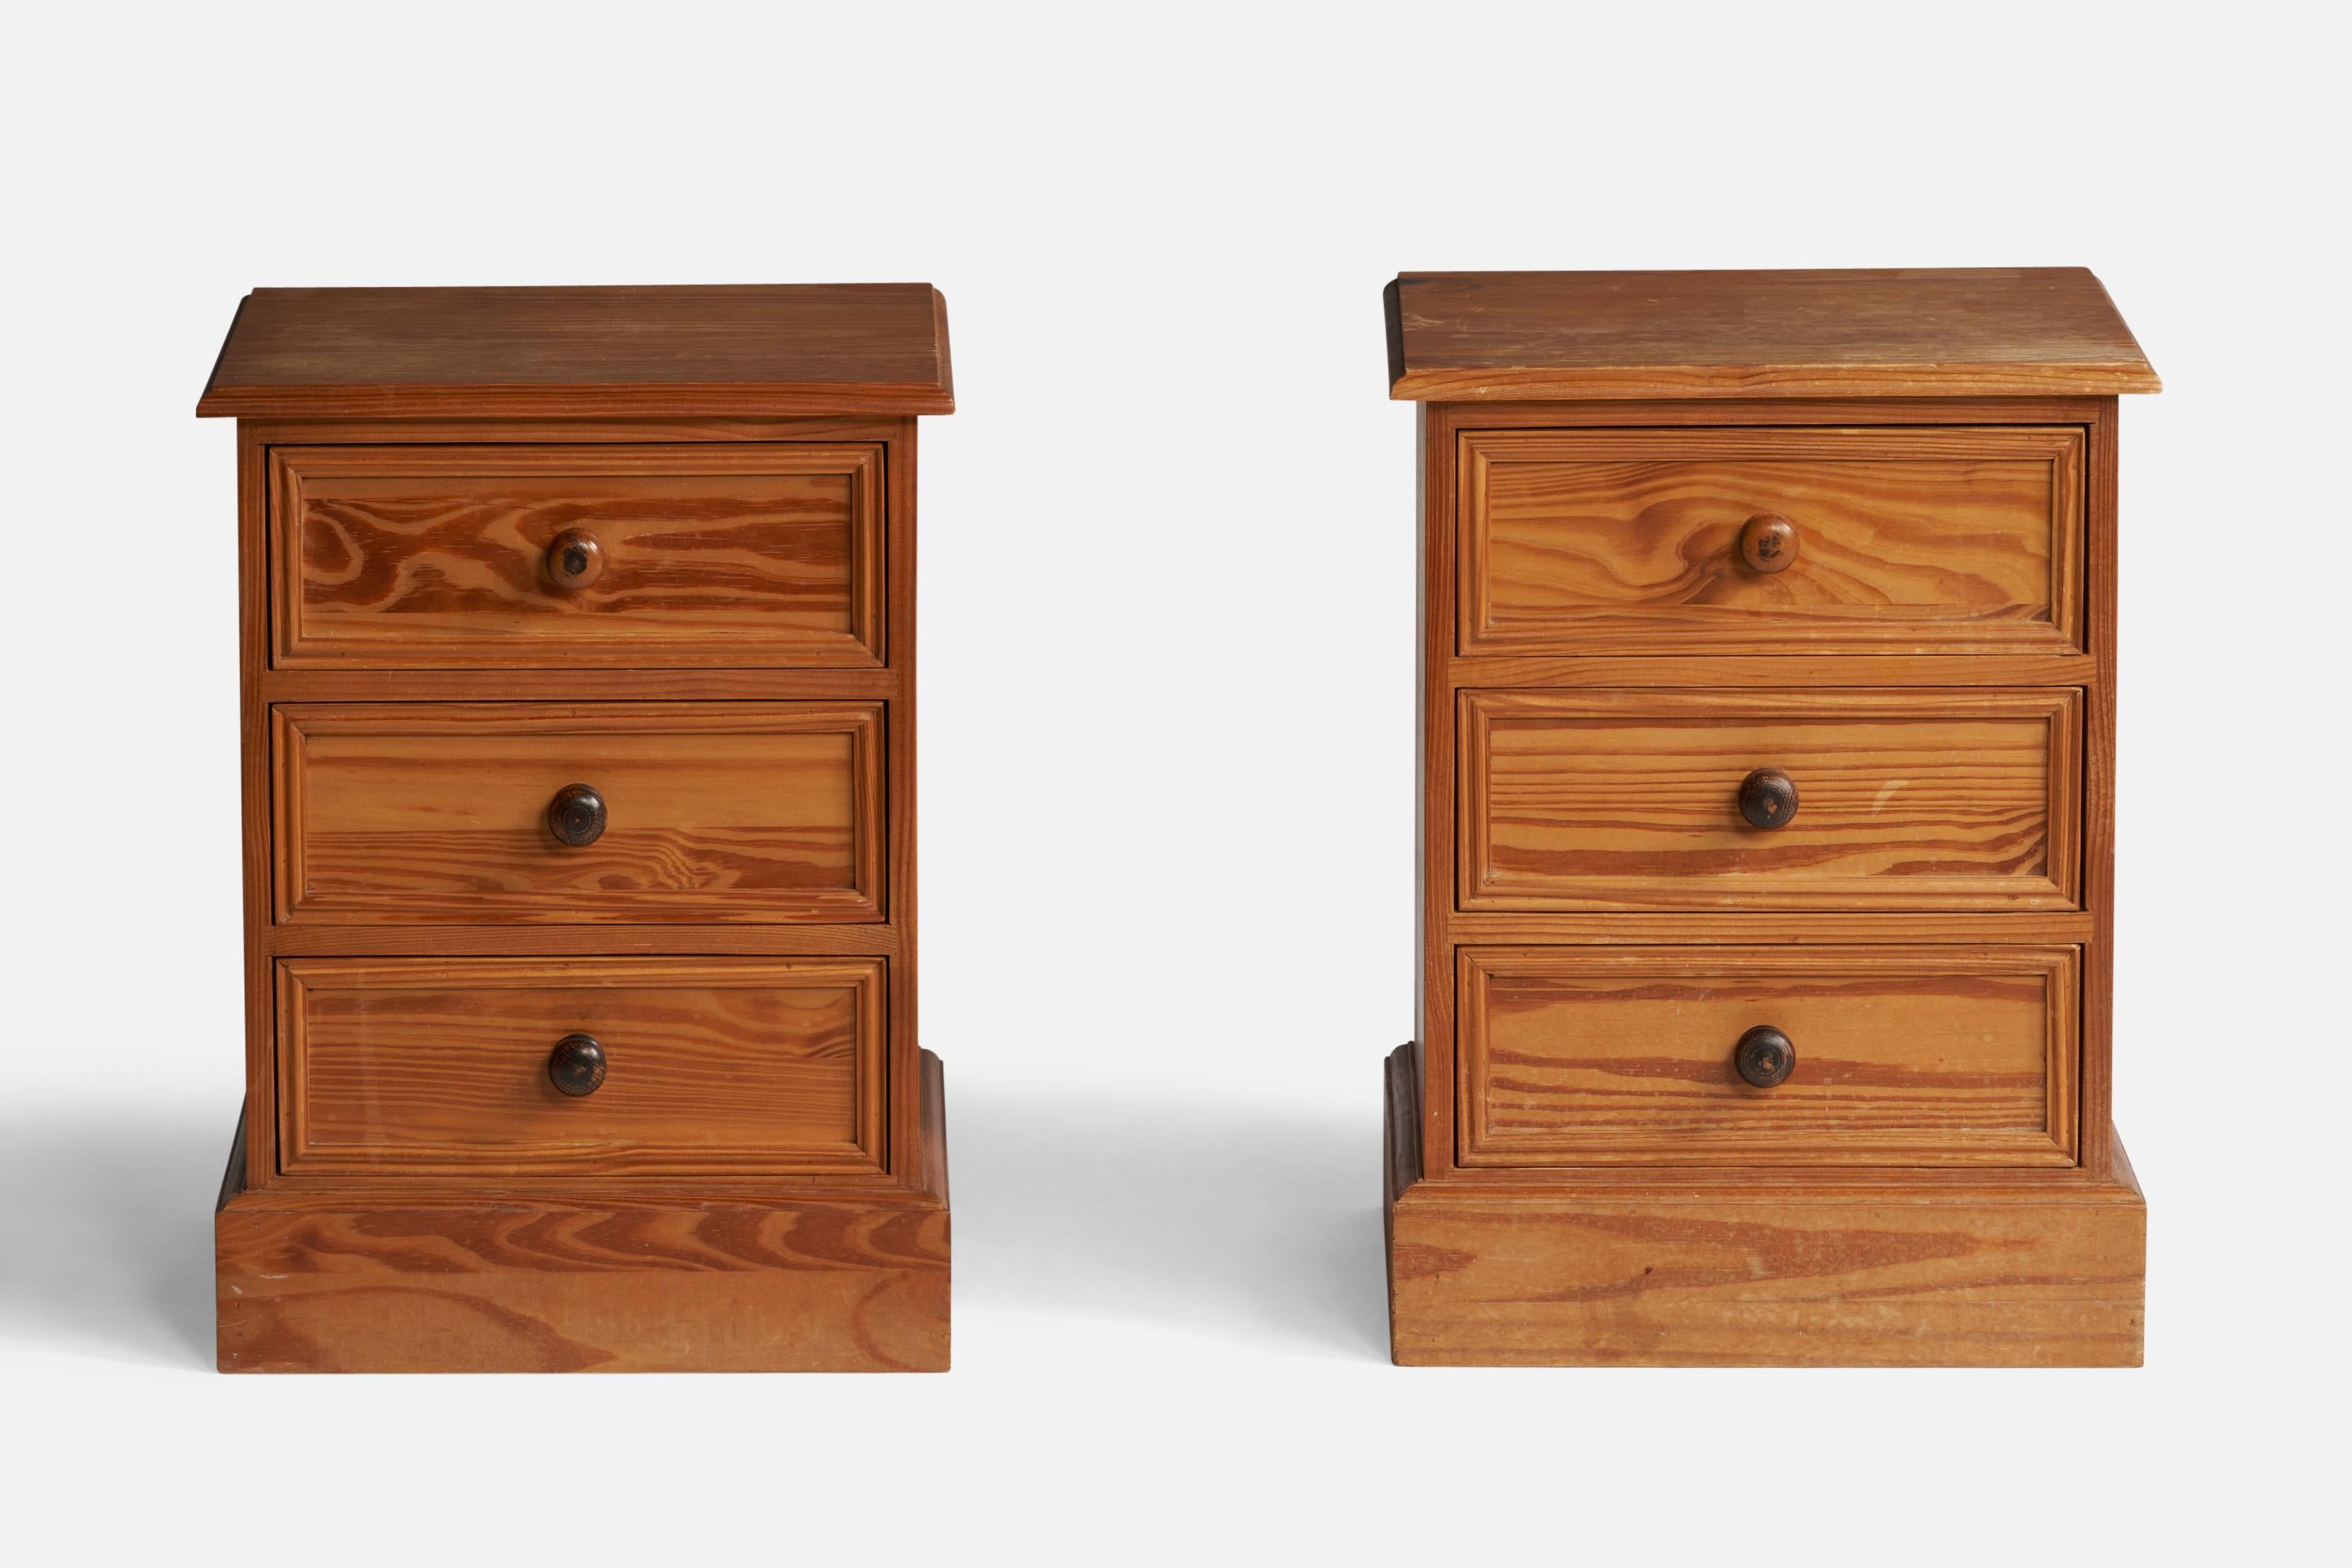 A pair of pine and stained pine nightstands designed and produced in the United Kingdom, c. 1950s.